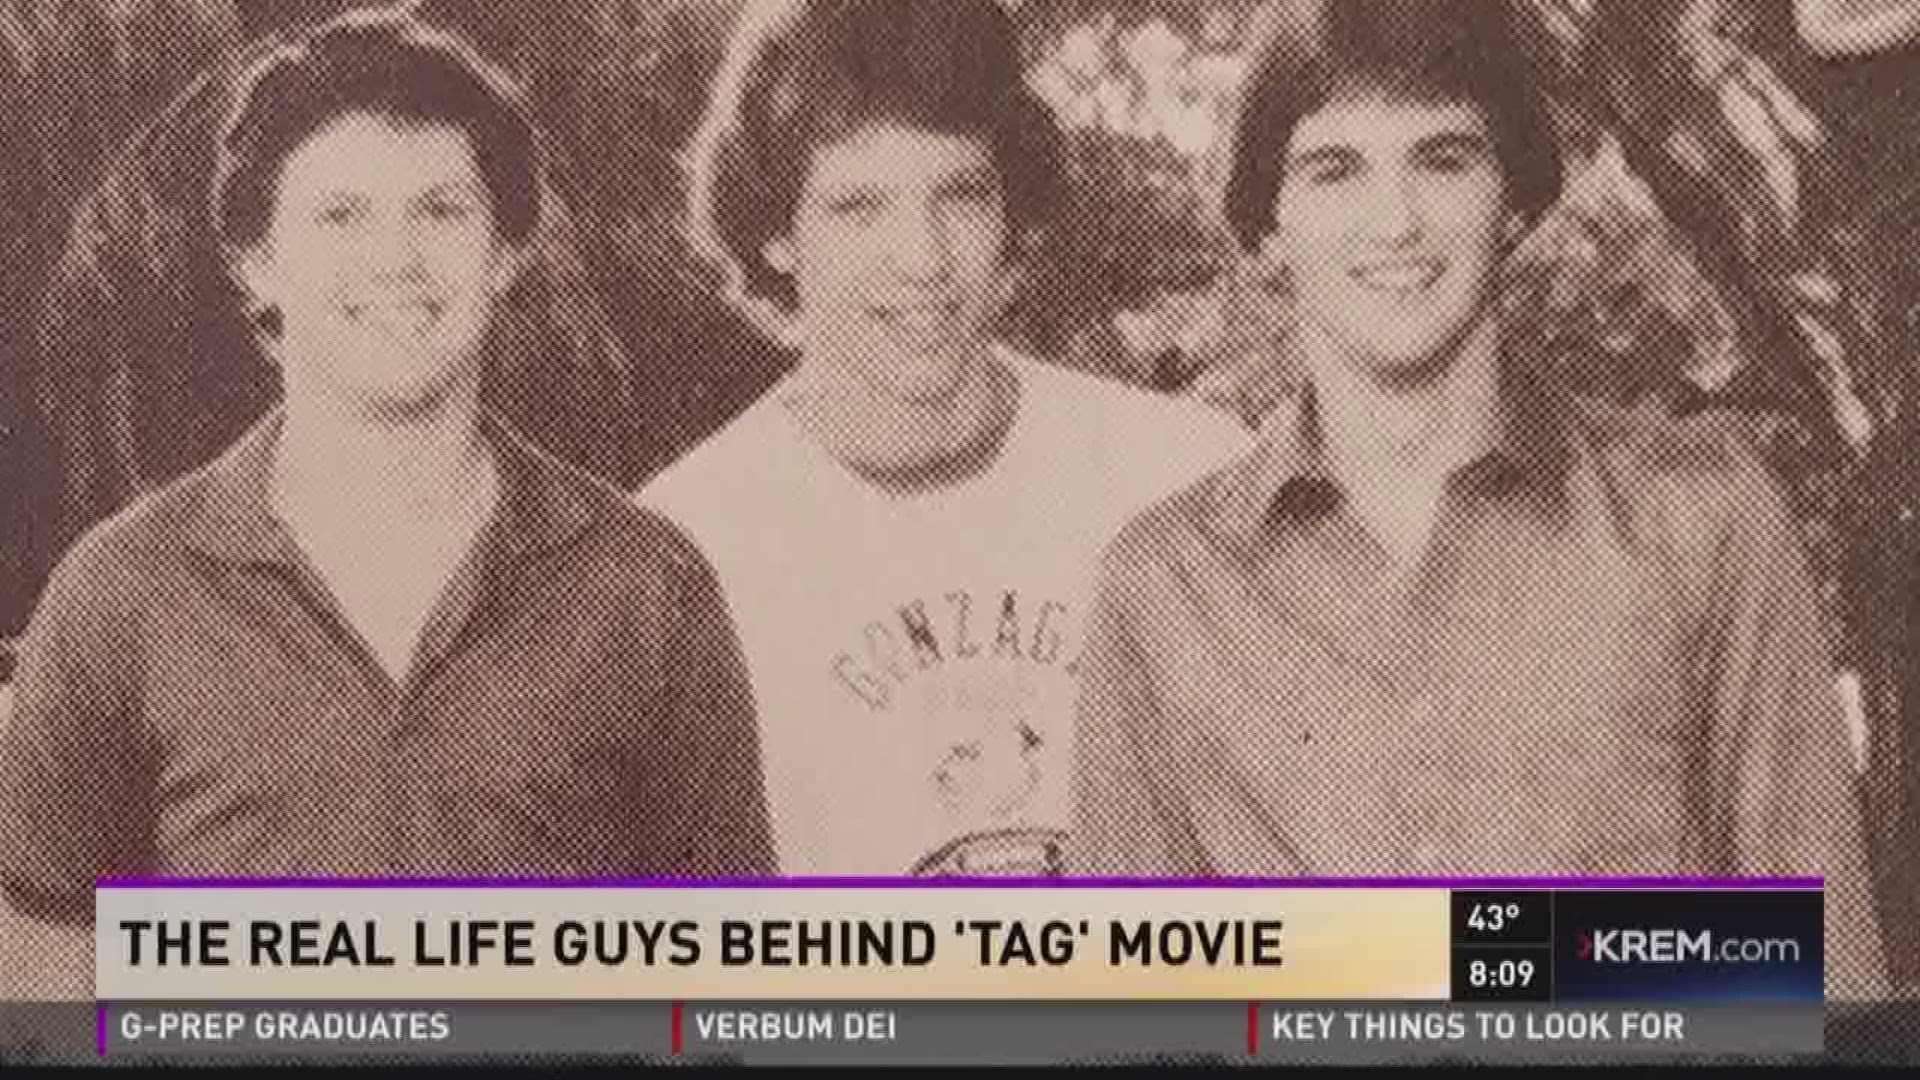 Spokane friends have been playing the same game of tag for 30 years, News